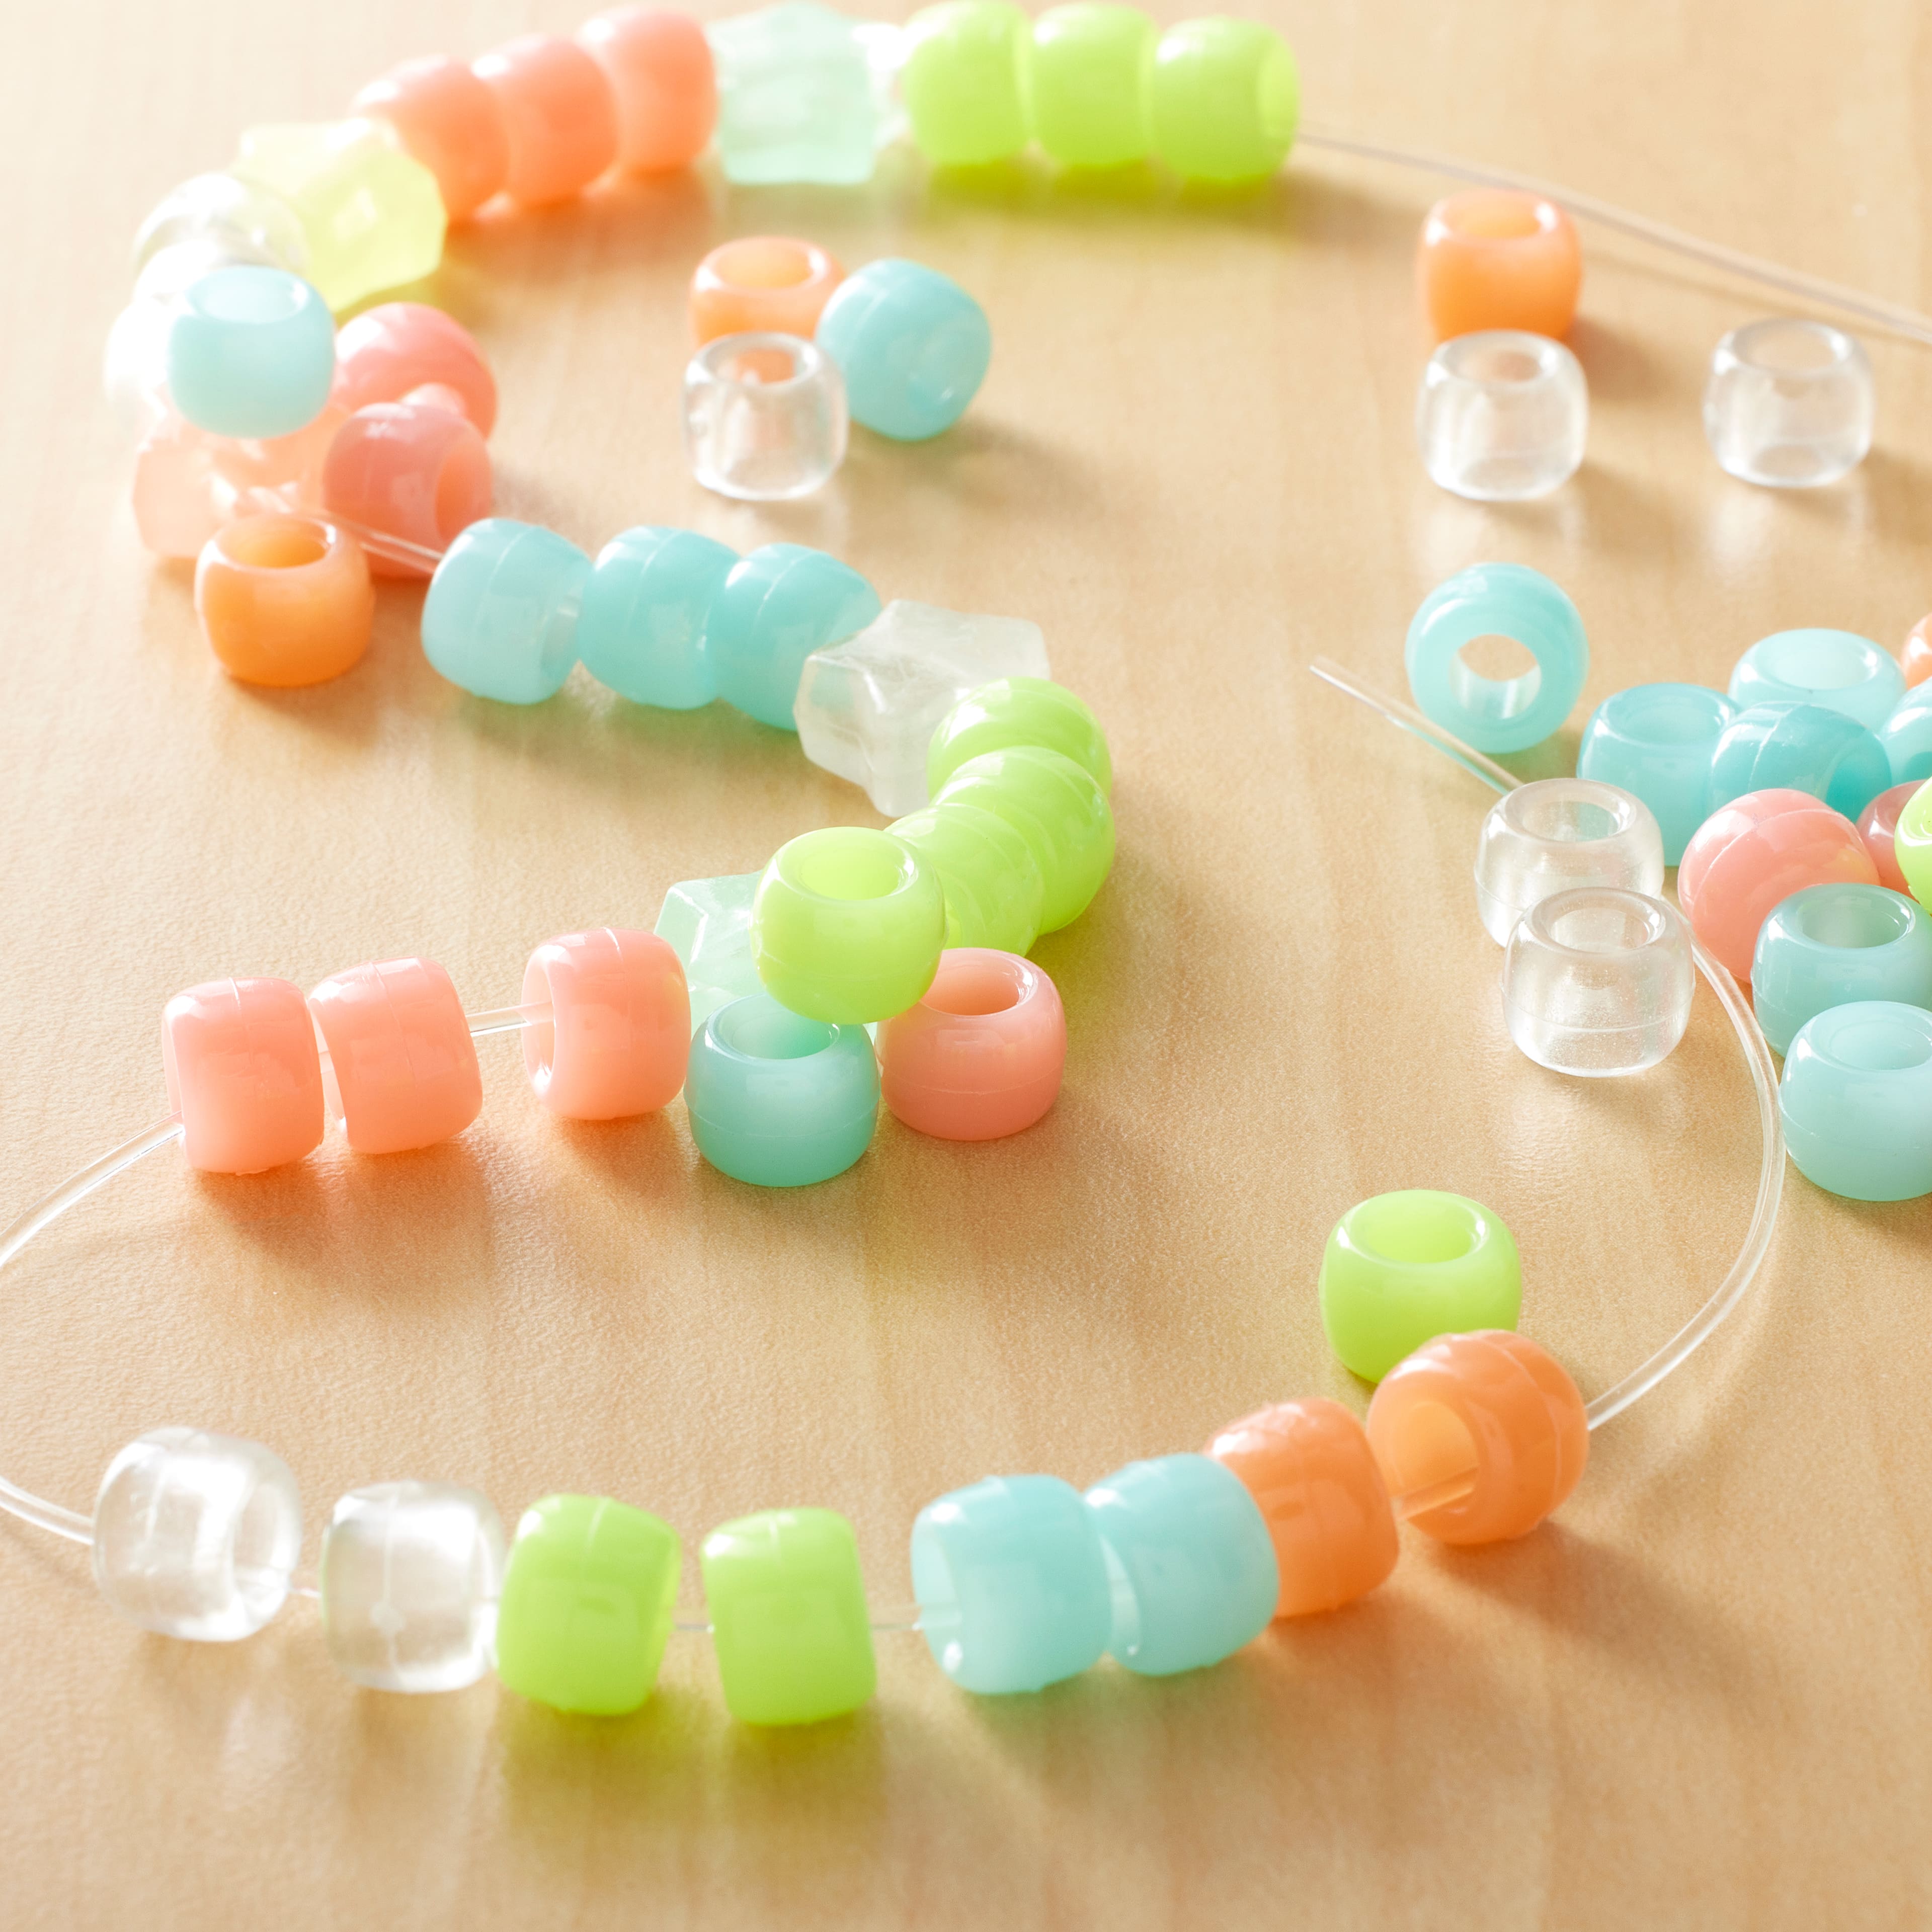 Bright Color Pop Beads by Creatology | Michaels